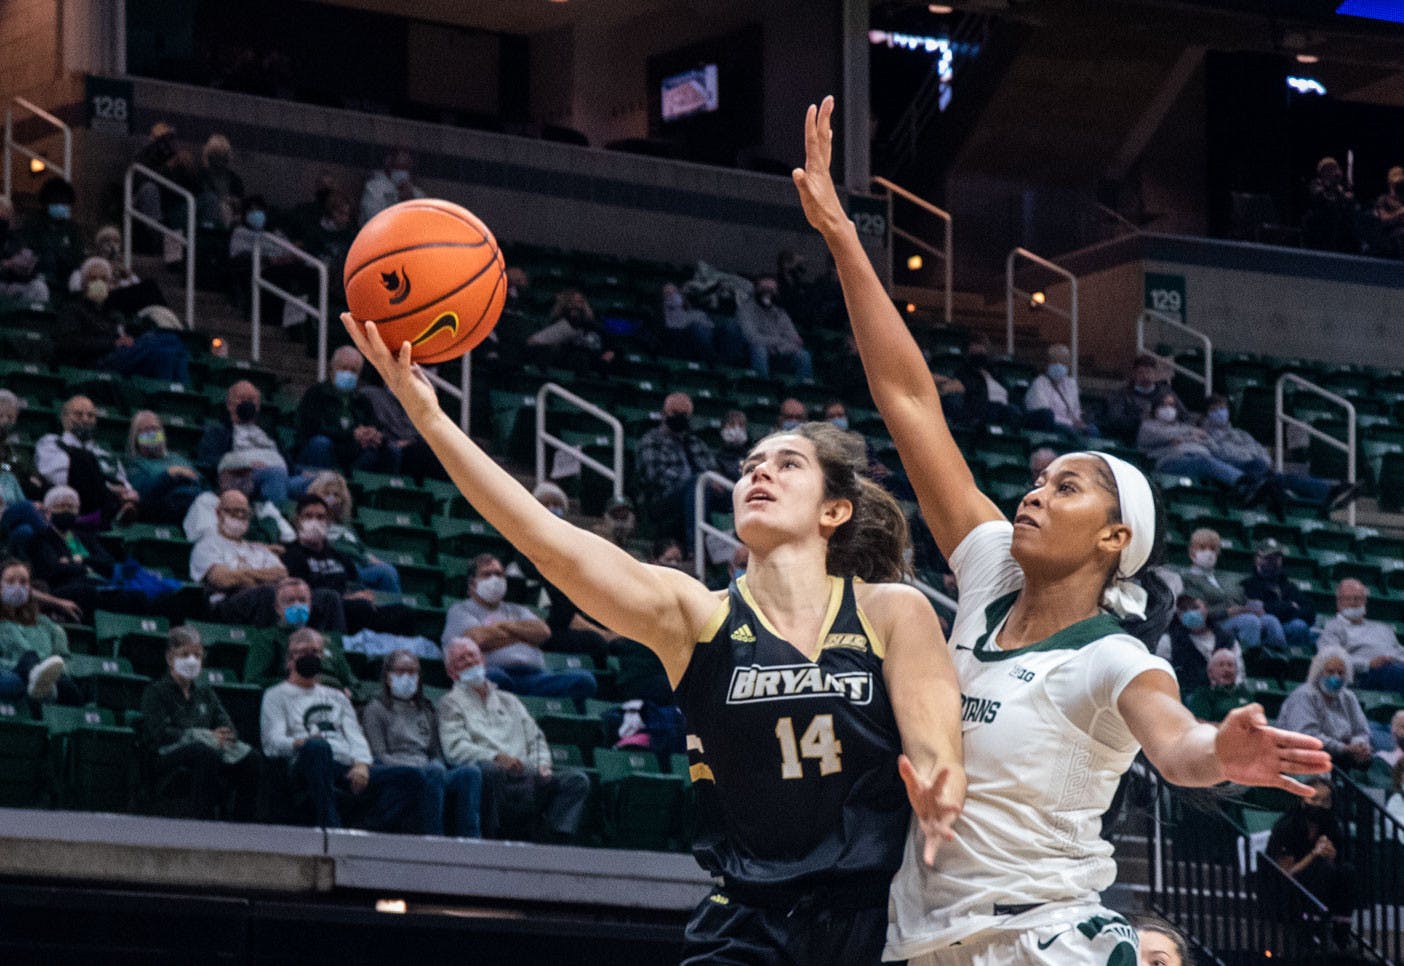 <p>Graduate student forward Alisia Smith (4) attempts to block a Bryant basket in the first quarter. The Spartans crushed the Bulldogs, 100-60, which led coach Suzy Merchant to her 300th win with Michigan State on Nov. 19, 2021.</p>